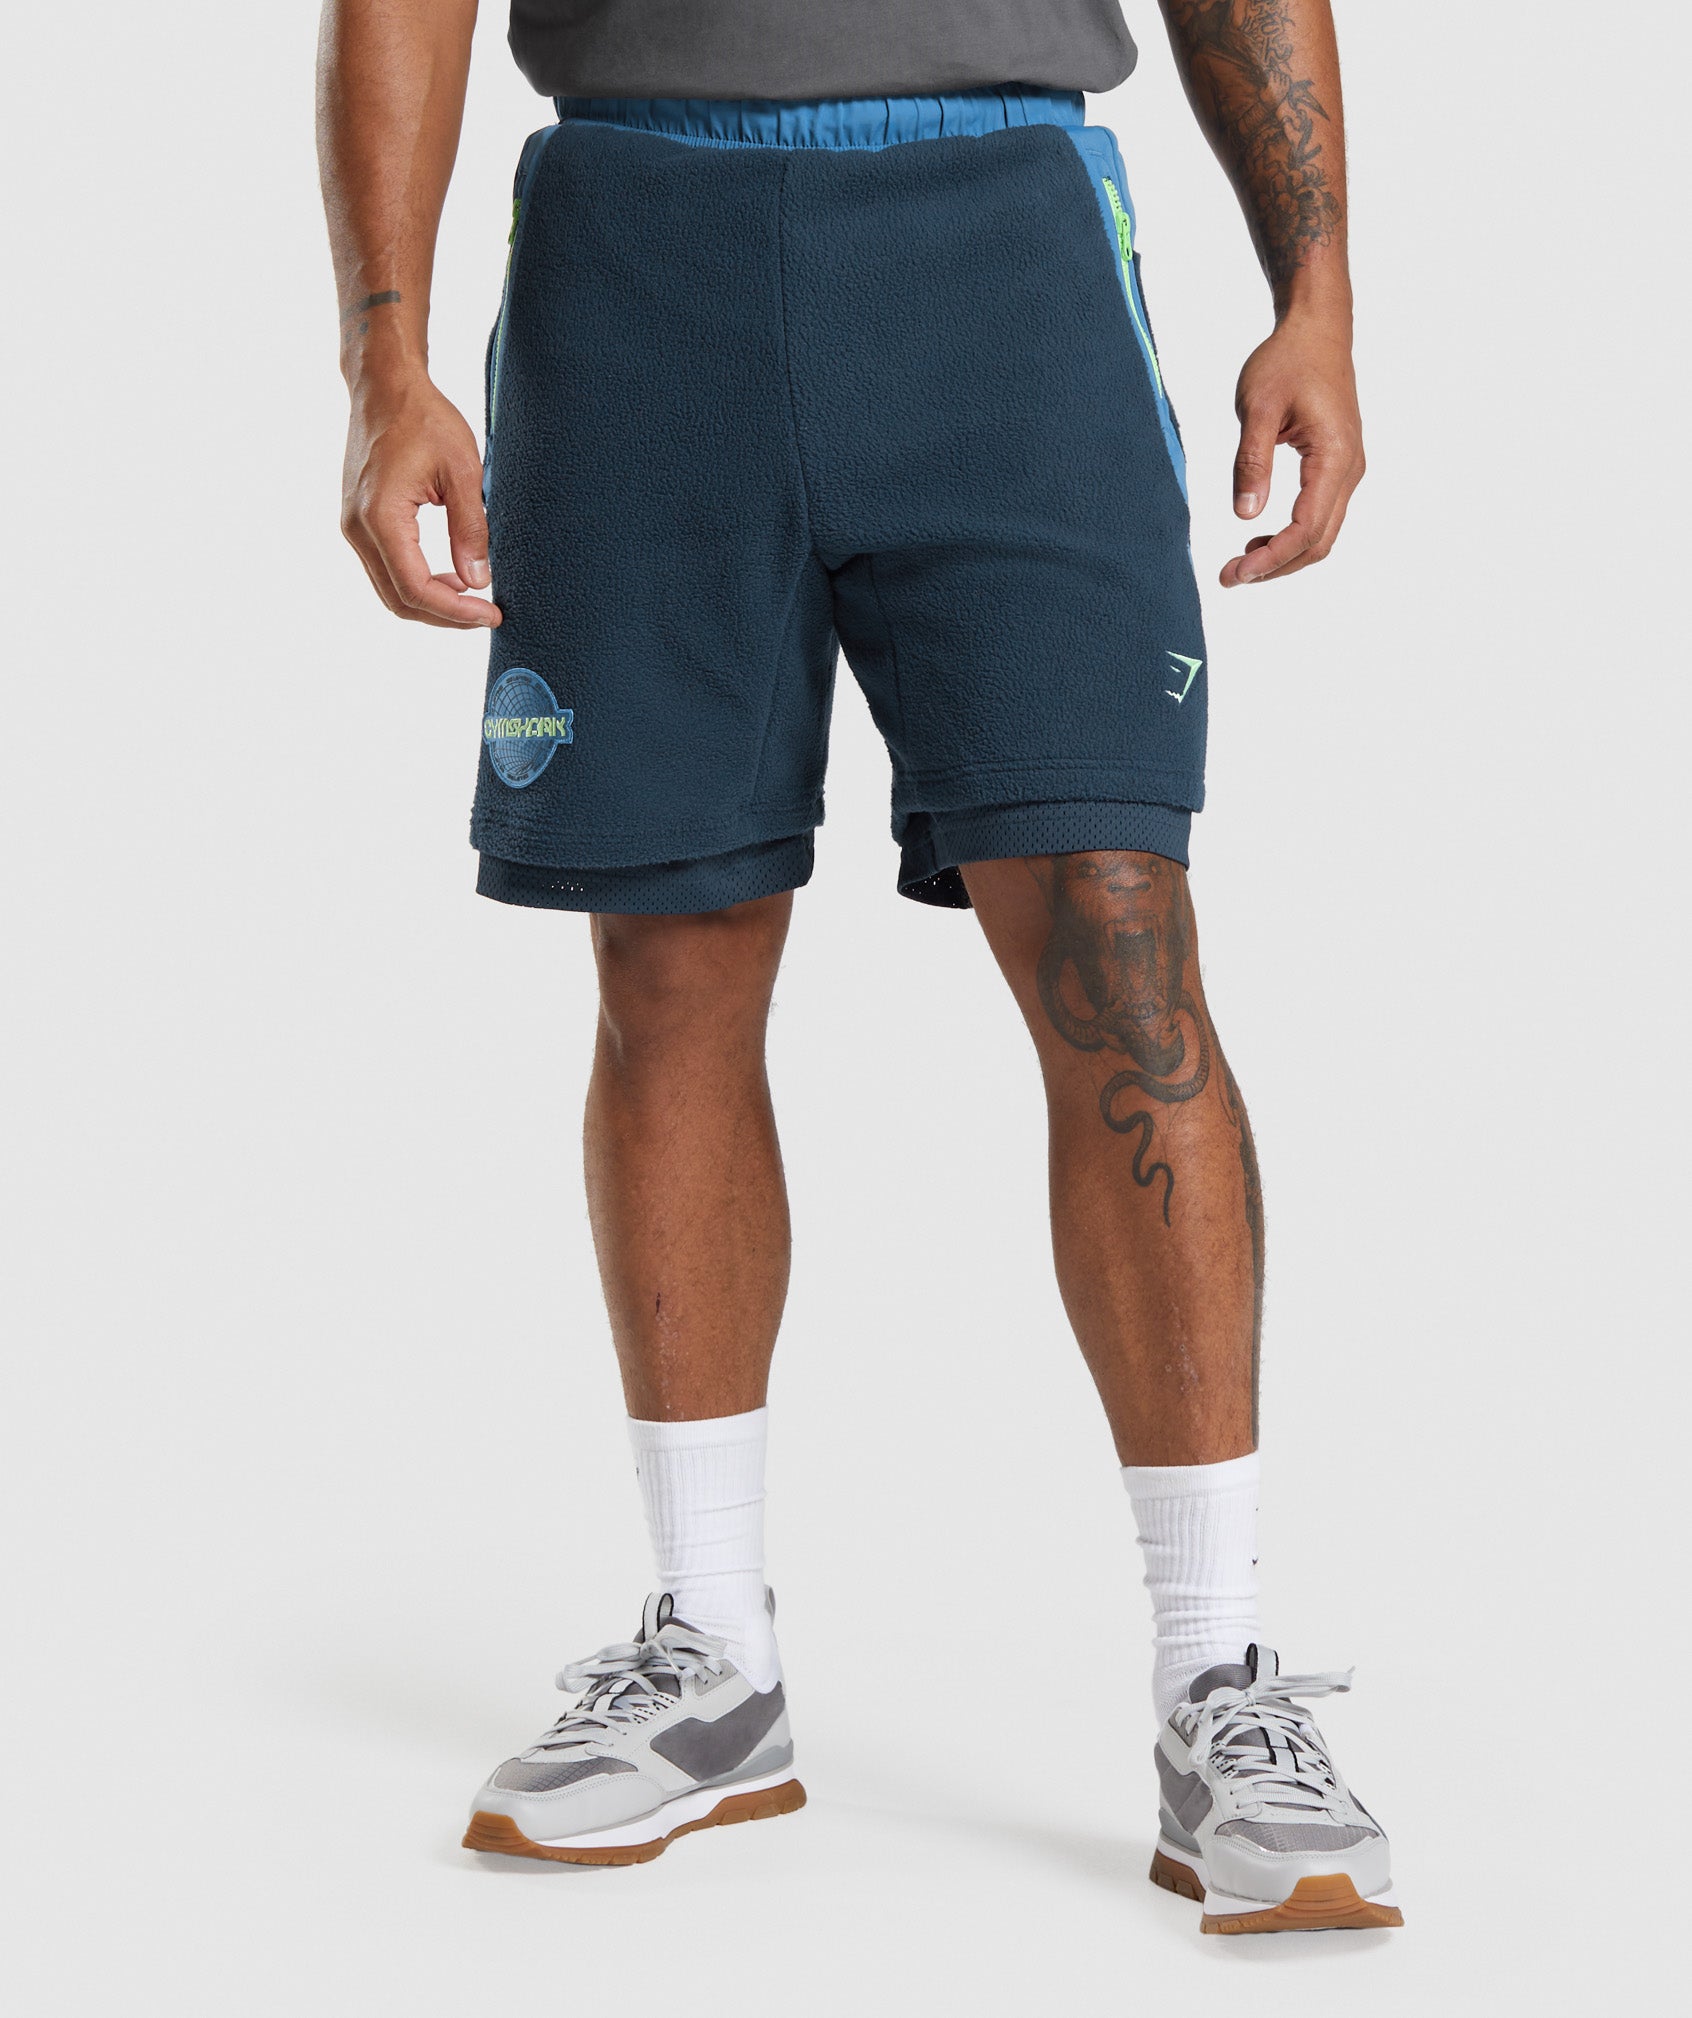 Vibes Shorts in Navy/Lakeside Blue - view 1